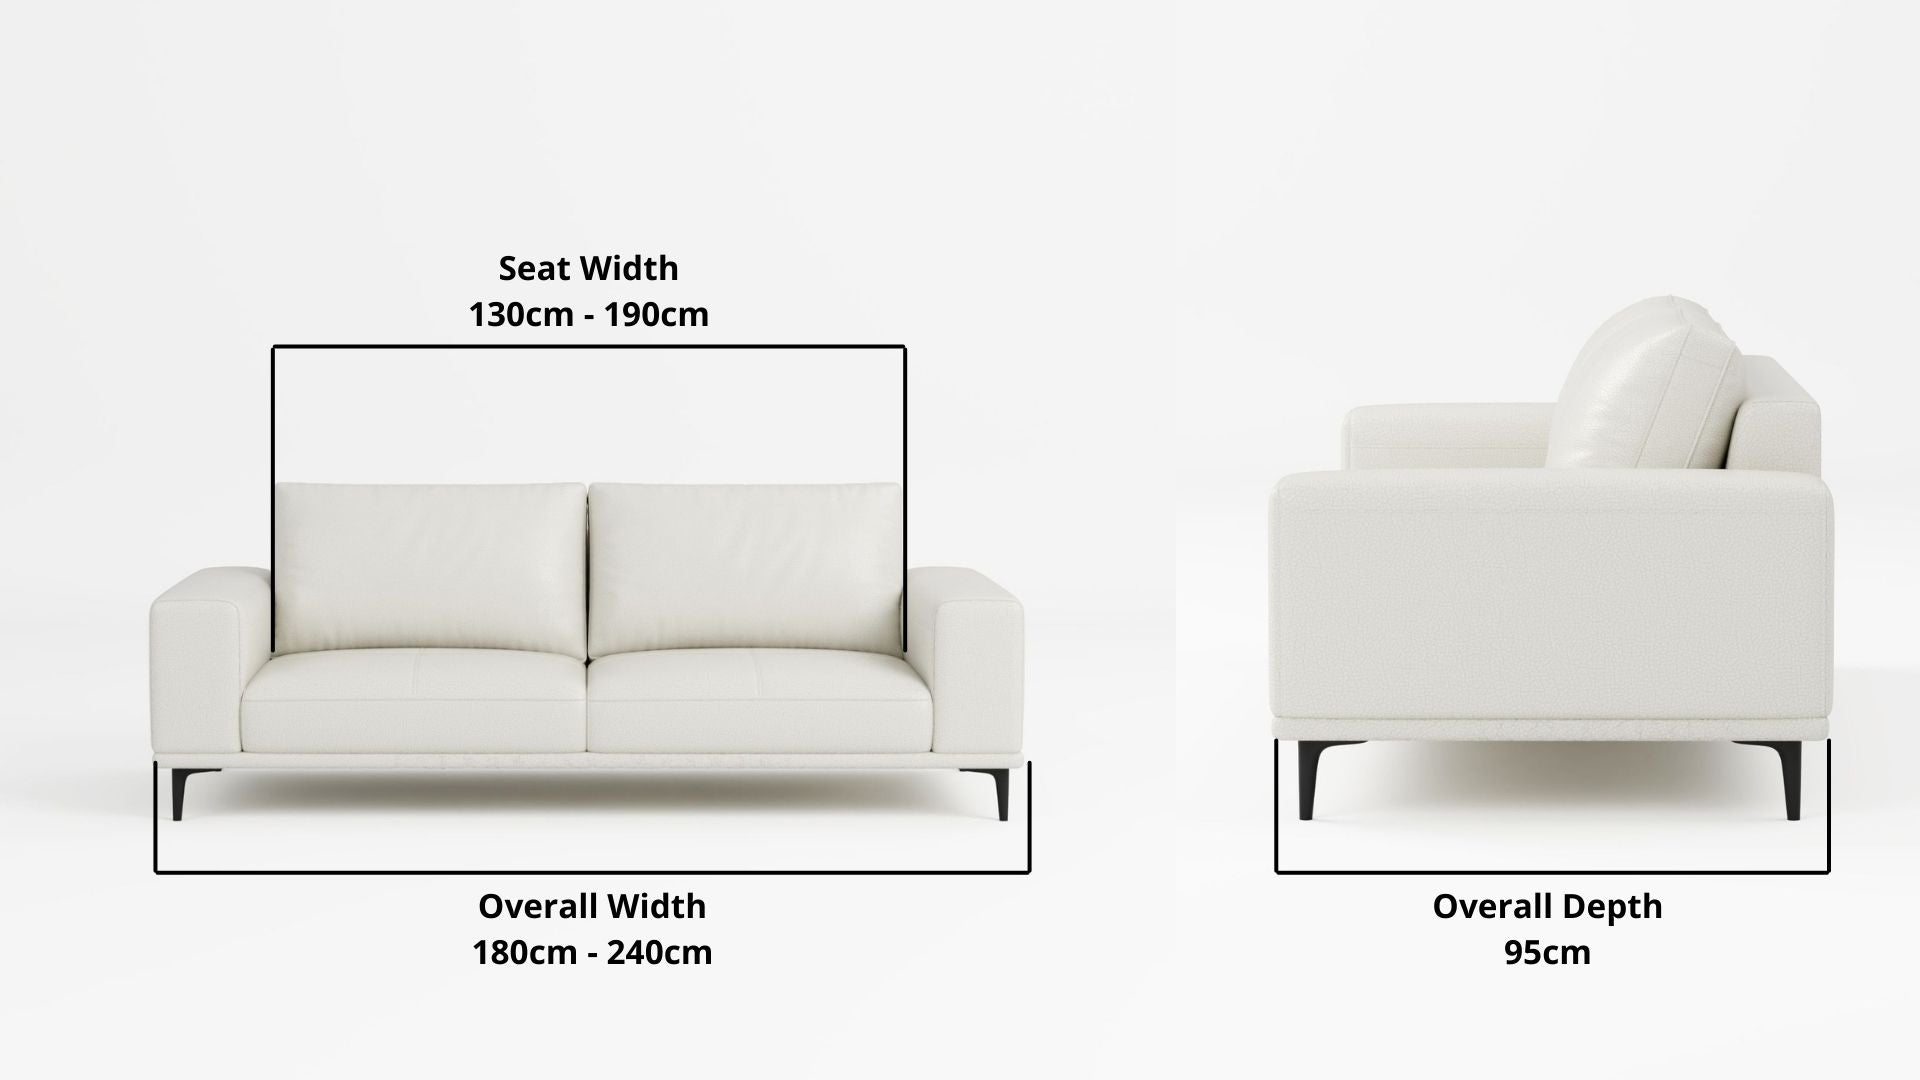 Details the key dimensions in terms of overall width, overall depth and seat width for Calm Full Leather Sofa